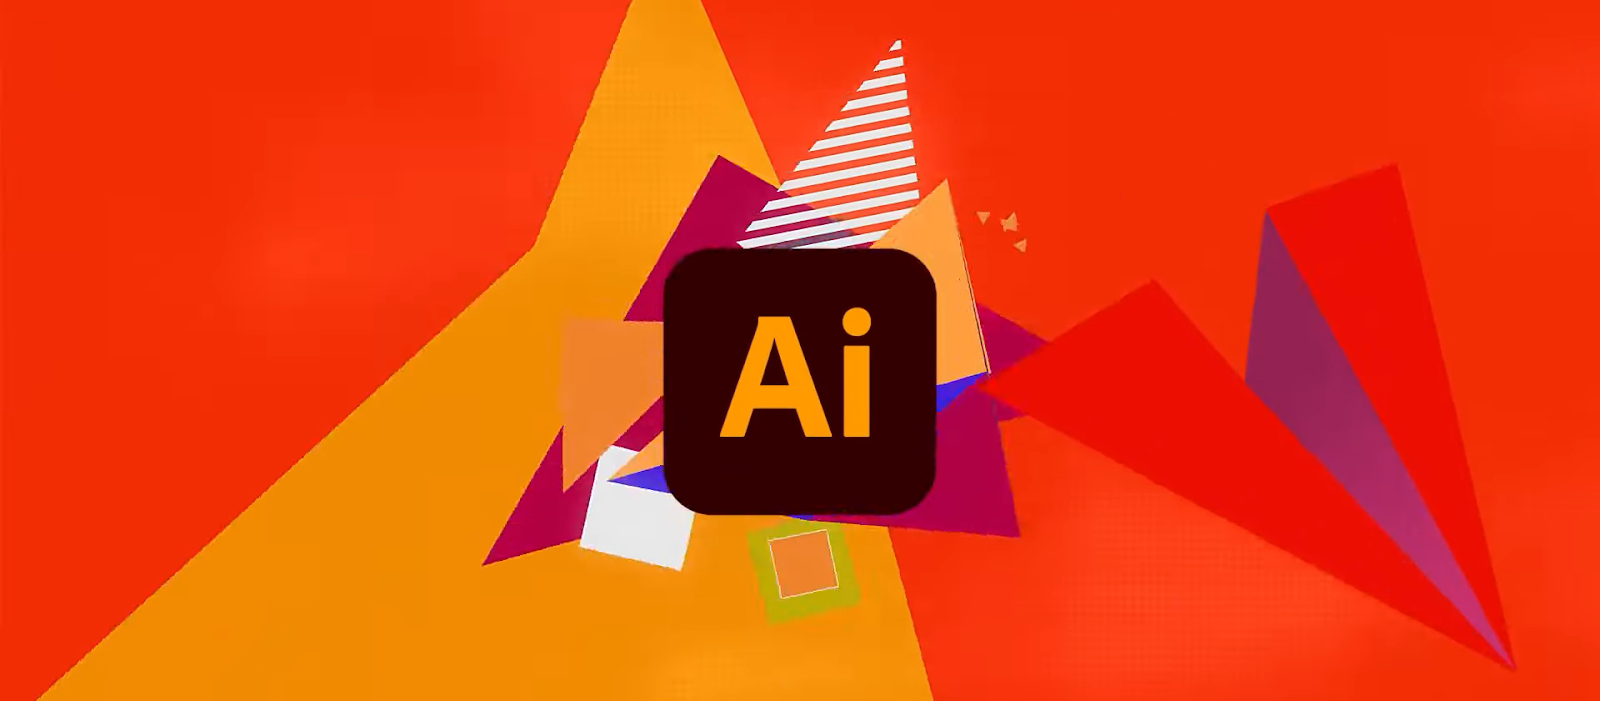 Adobe Illustrator logo surrounded by abstract shapes on a warm orange and red gradient background